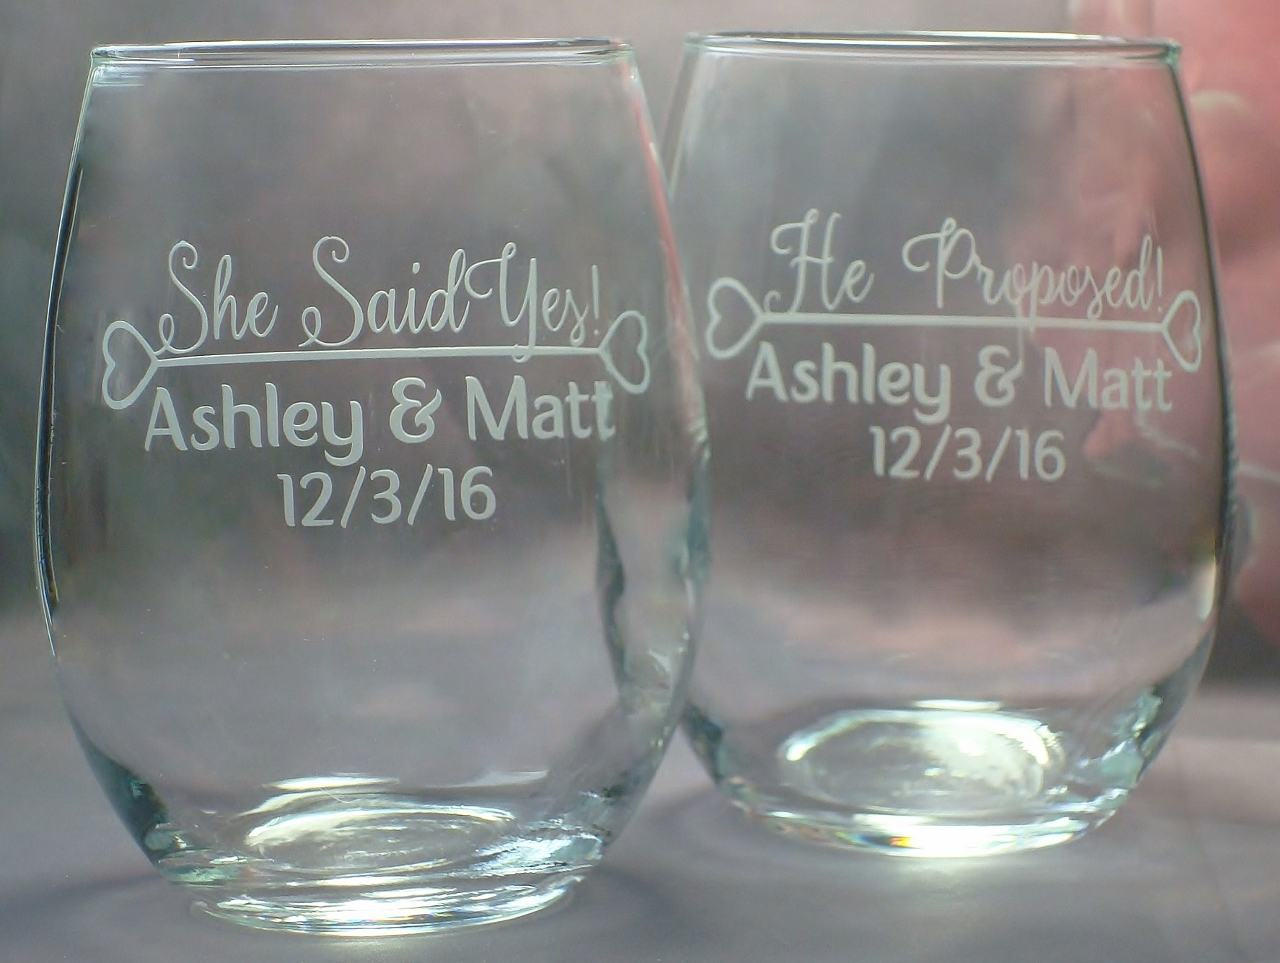 youjustpayforshipping.com  Wine glass gifts ideas, Glass gifts, Wine gifts